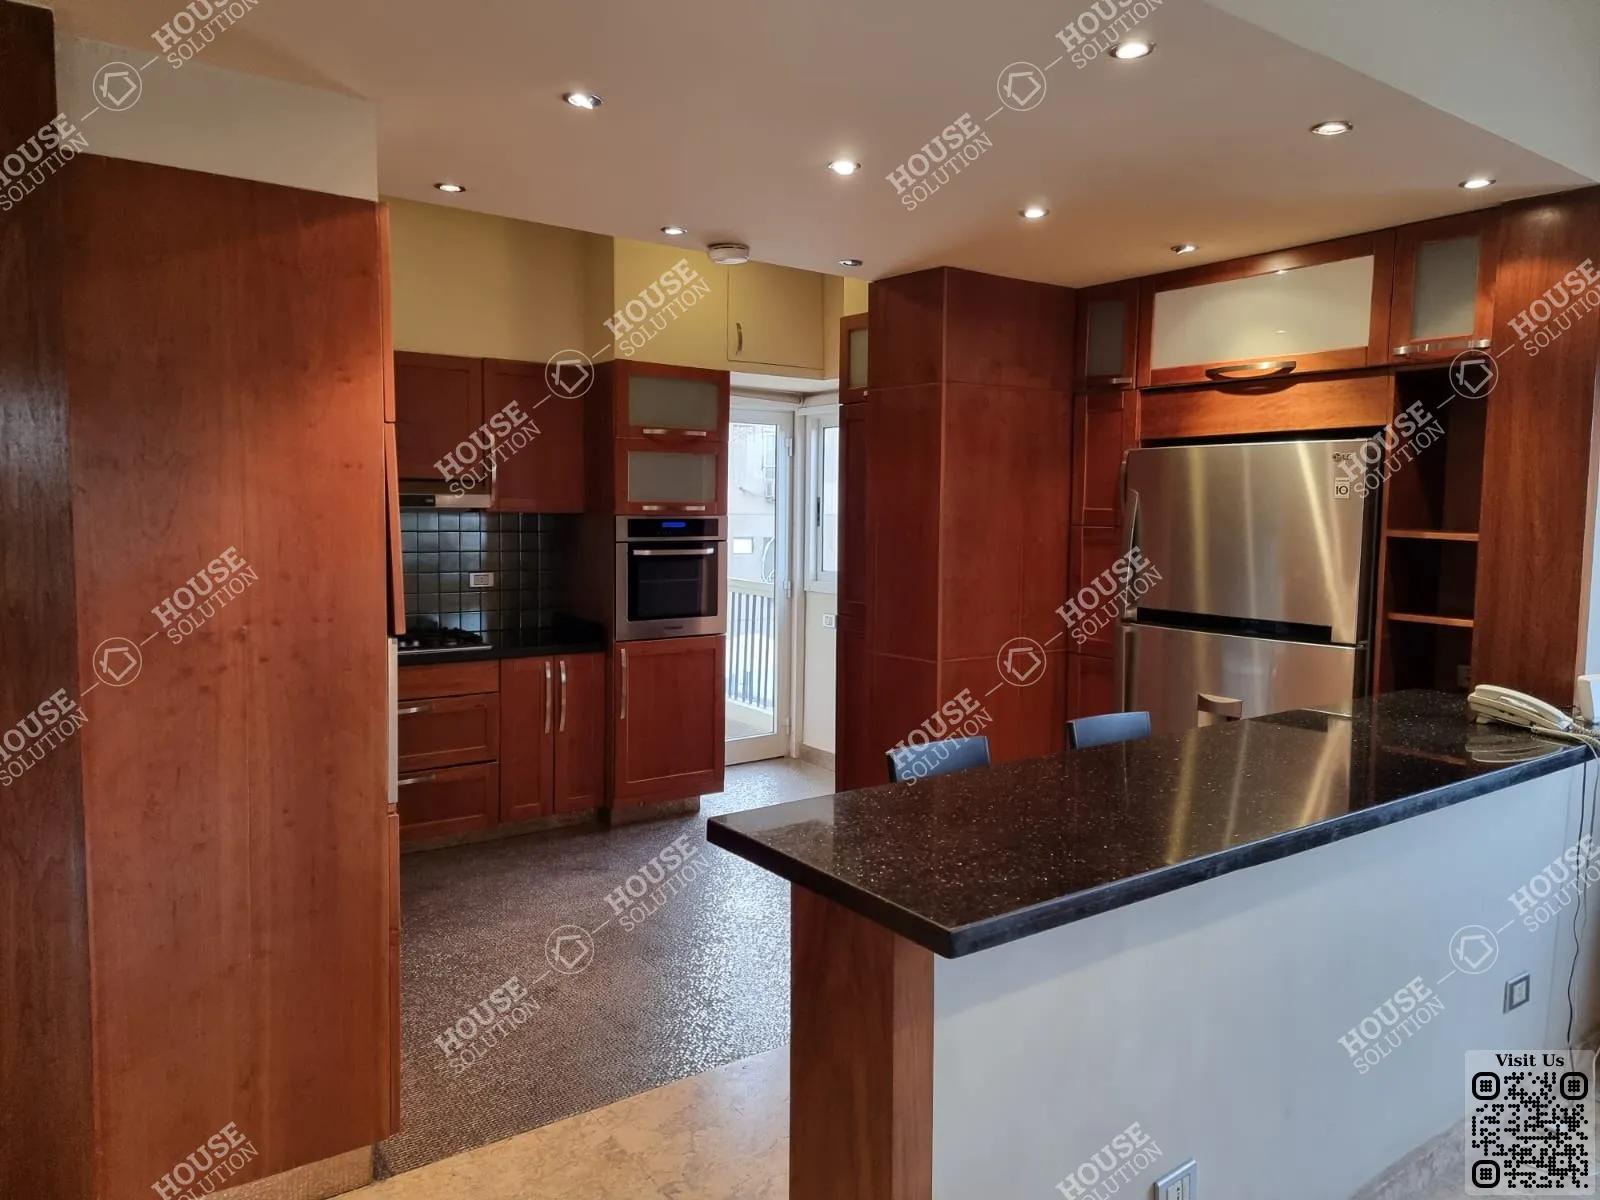 KITCHEN  @ Apartments For Rent In Maadi Maadi Degla Area: 240 m² consists of 3 Bedrooms 3 Bathrooms Modern furnished 5 stars #5332-1